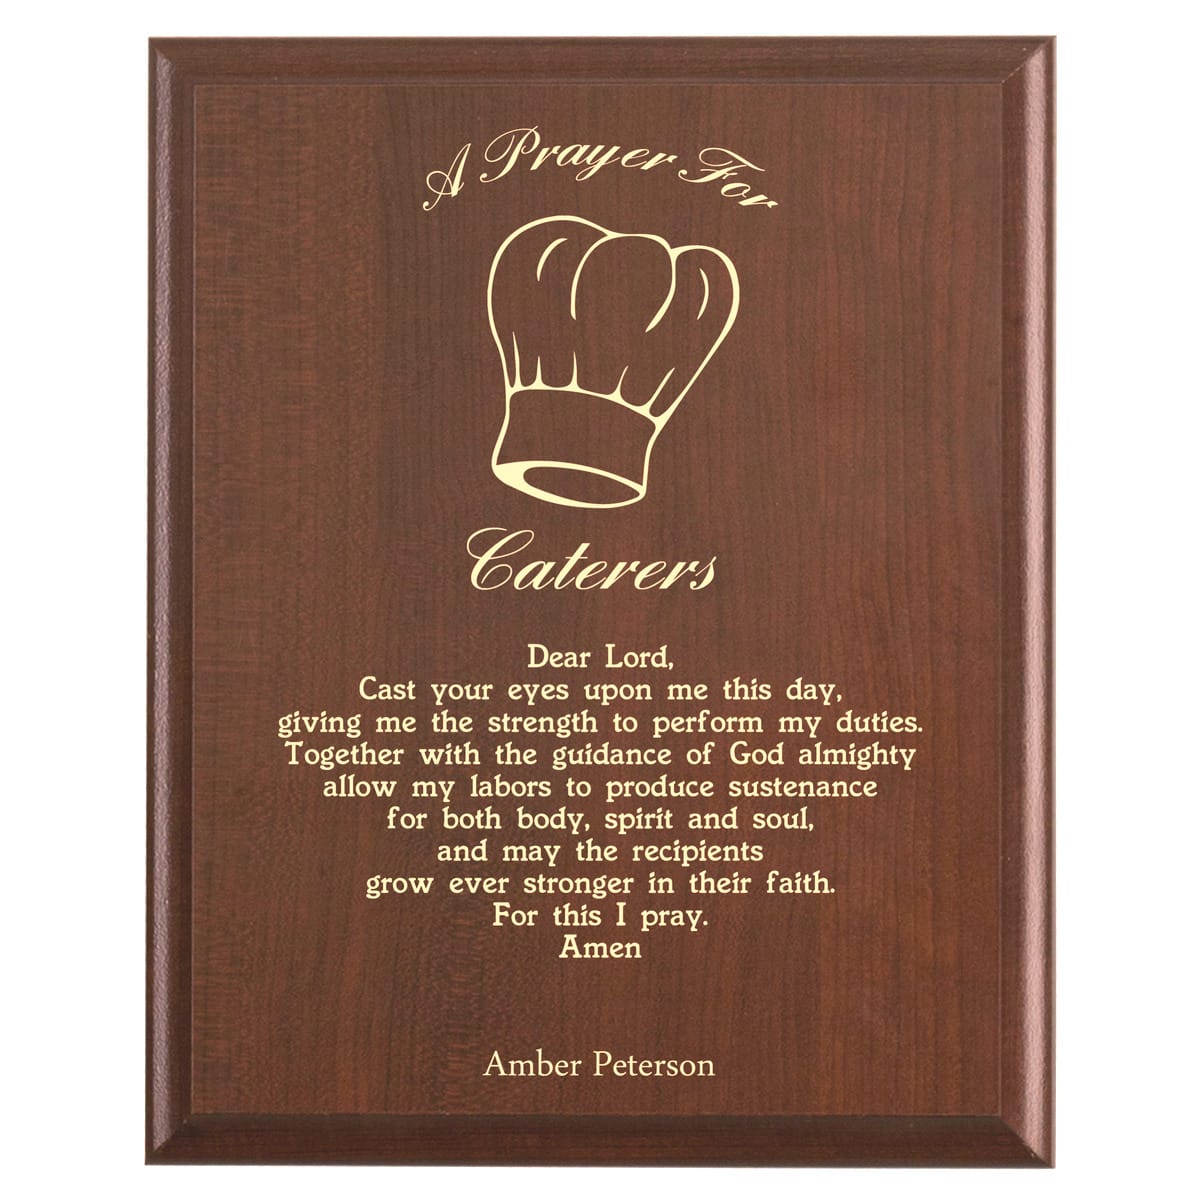 Plaque photo: Caterer Prayer Plaque design with free personalization. Wood style finish with customized text.